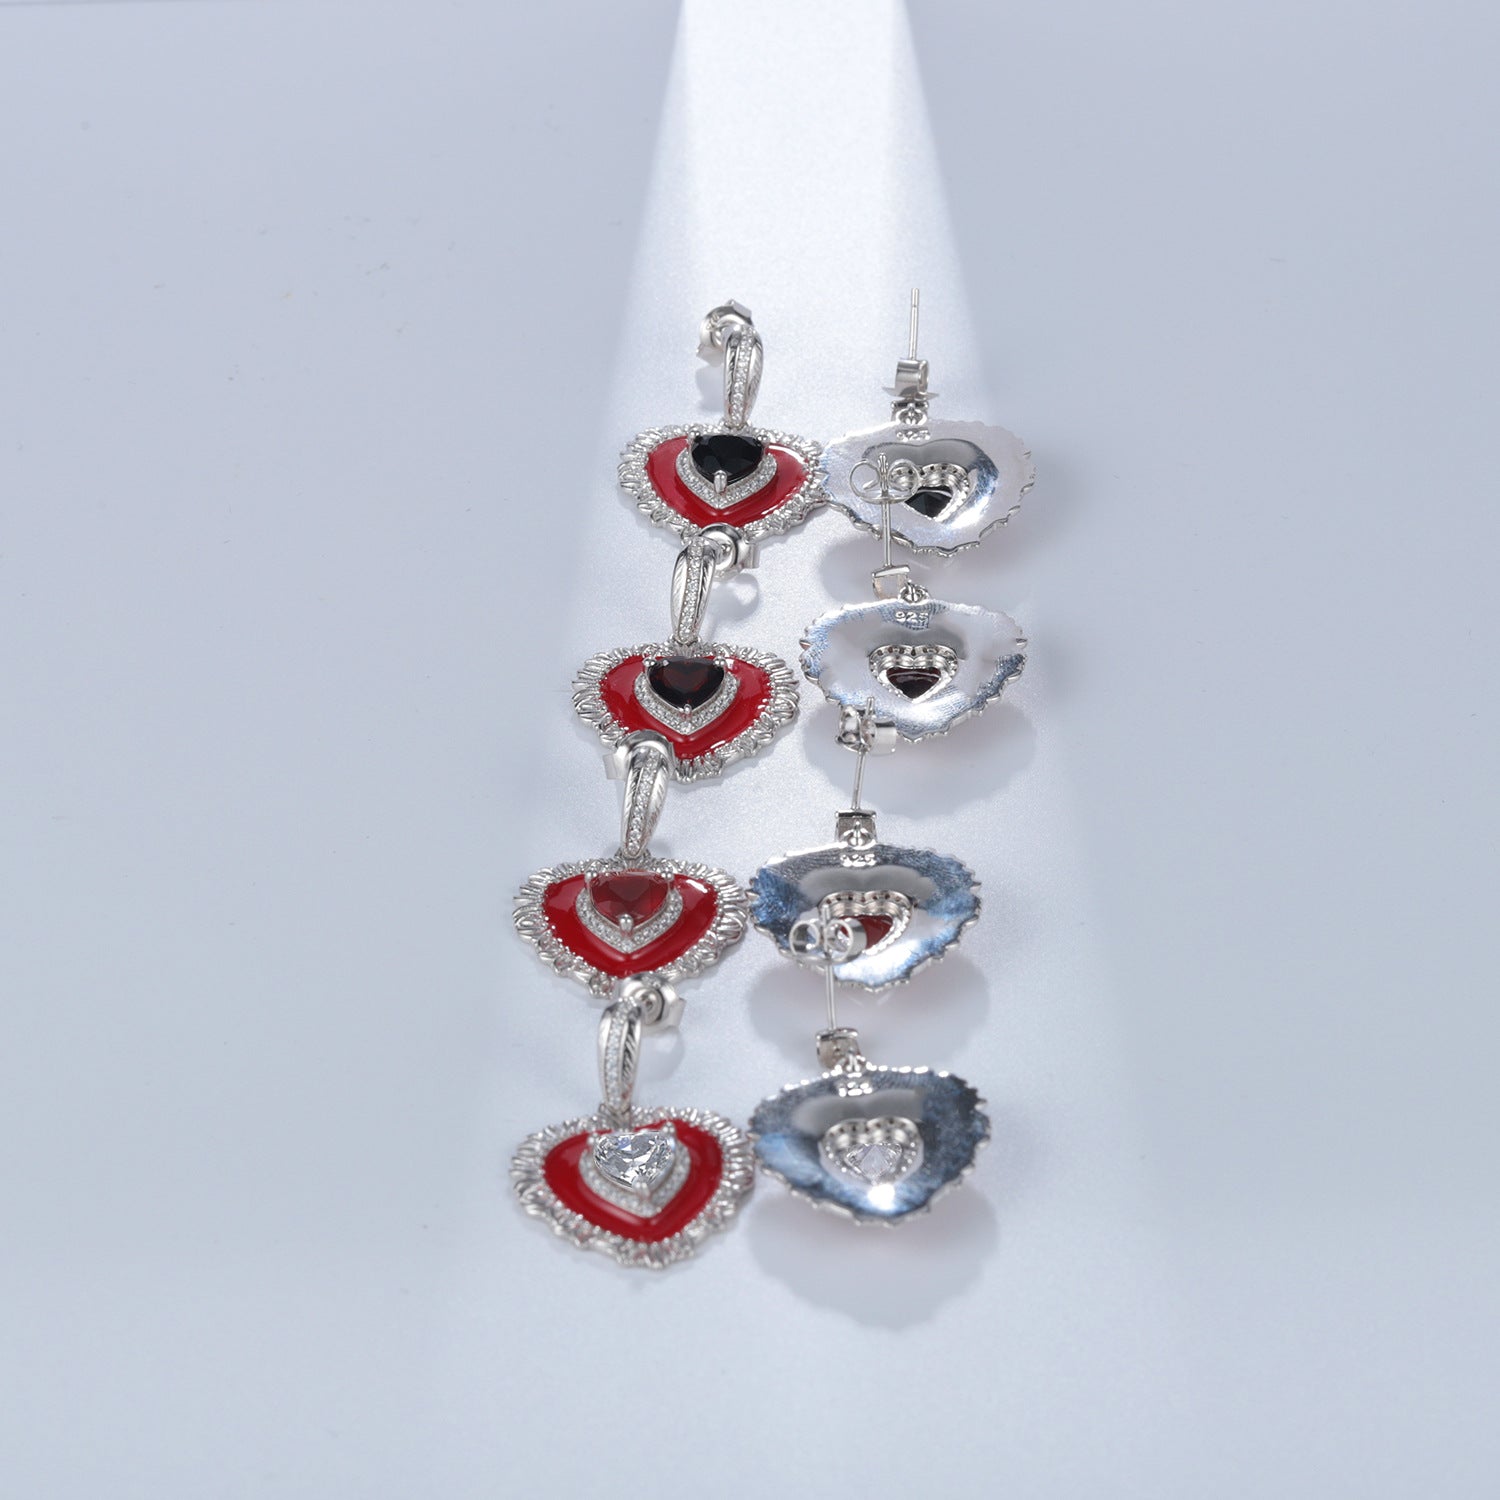 Colourful Natural Gemstone Love Design Silver Studs Earrings for Women